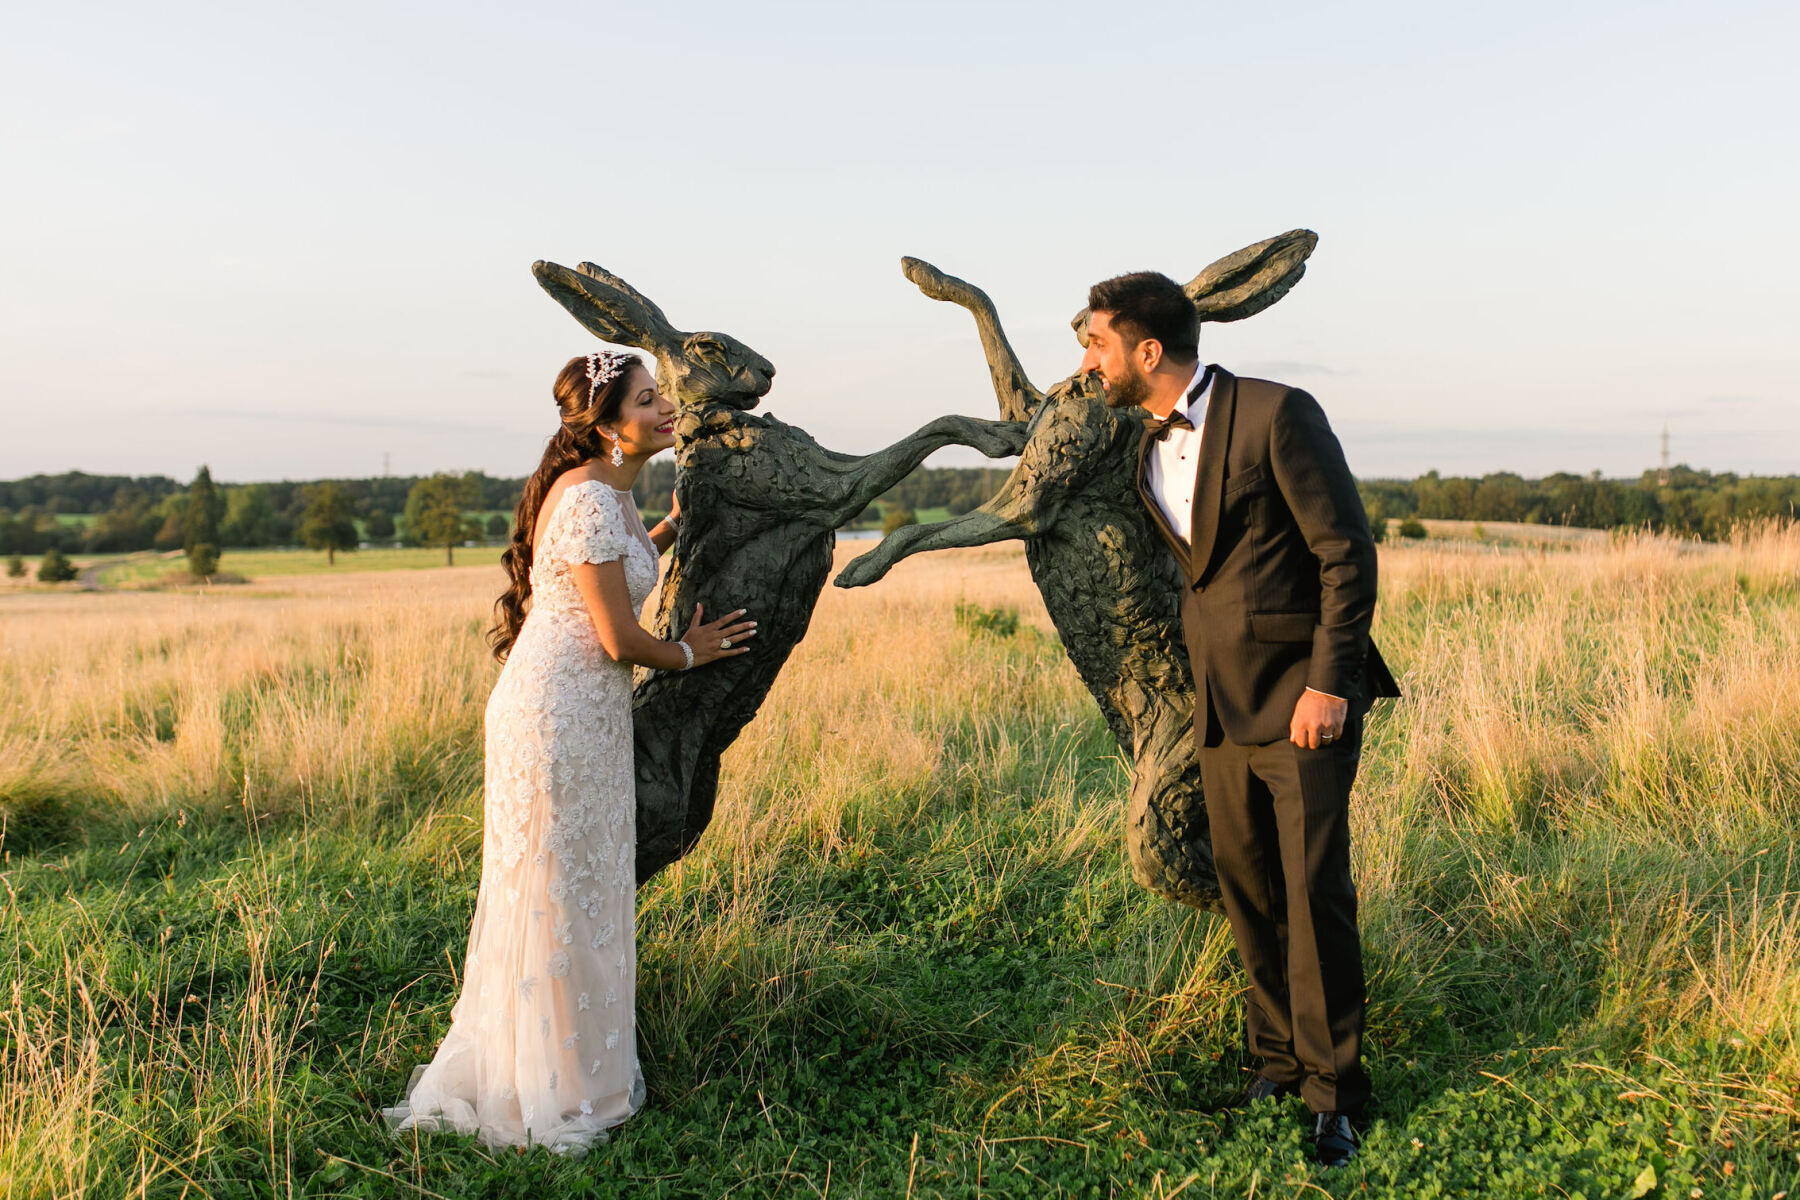 A bride and groom pose with large rabbit sculptures on the grounds of the Four Seasons Hampshire, where they had their colorful countryside wedding.